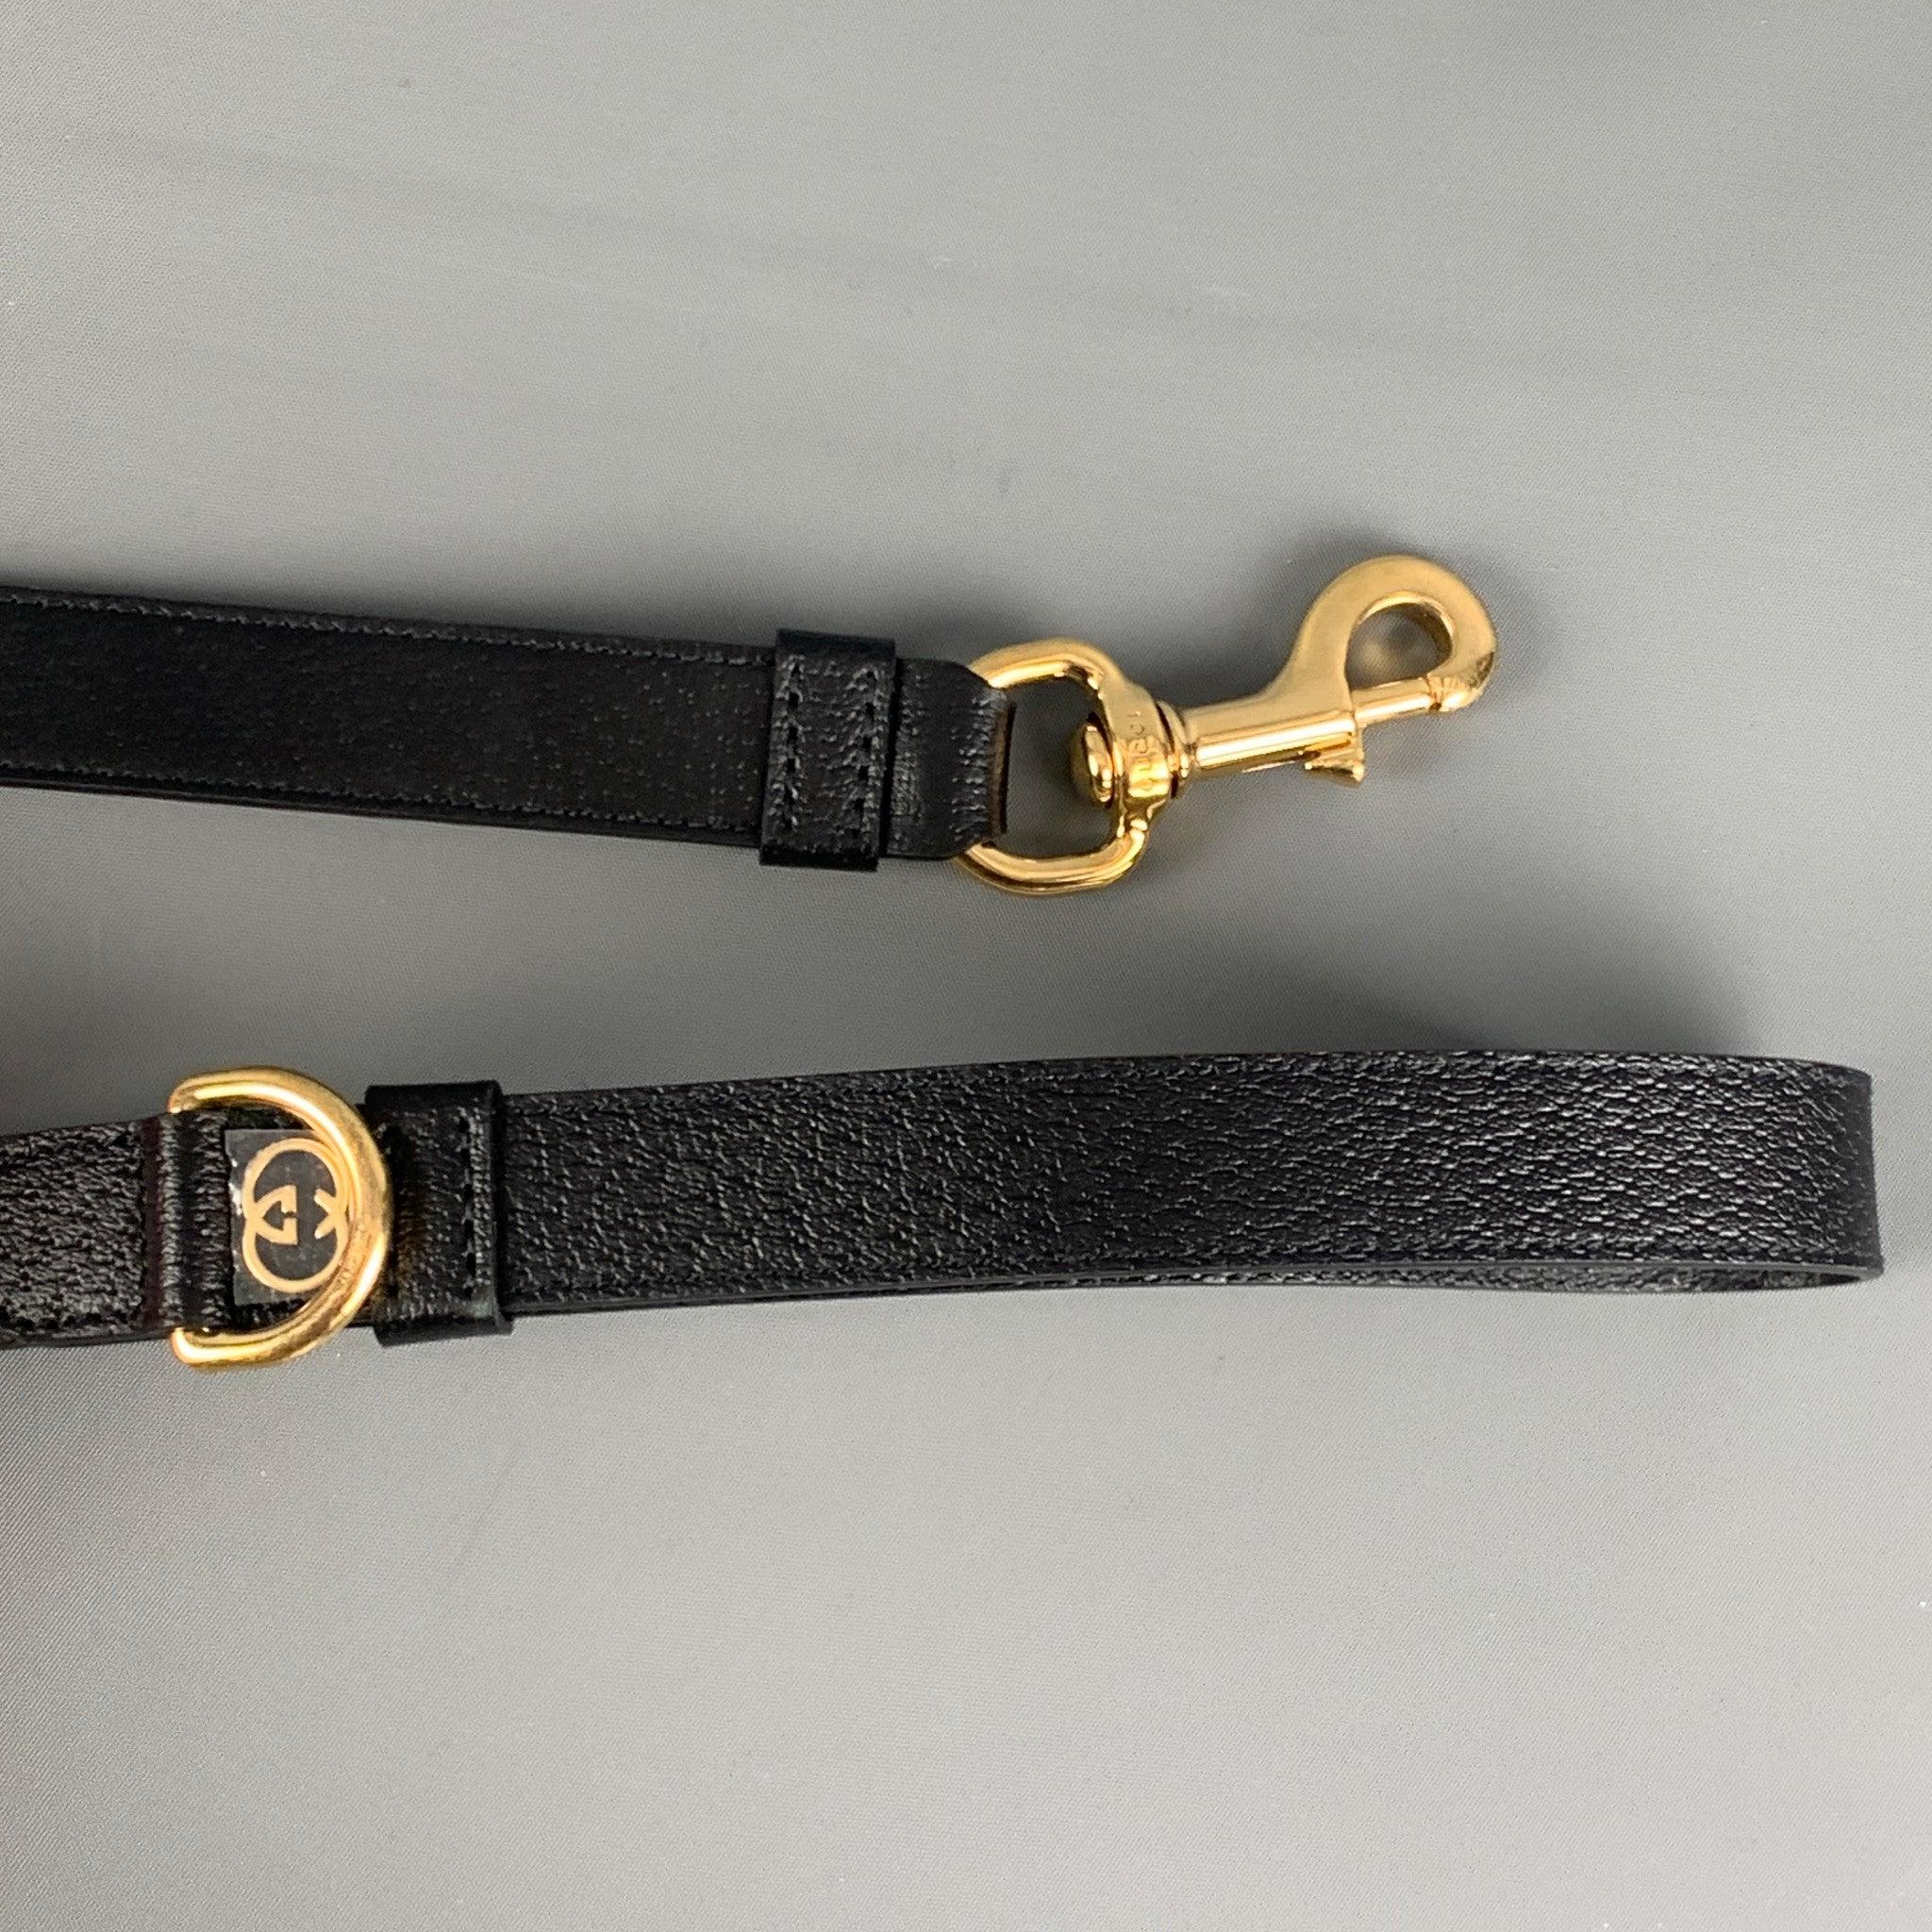 GUCCI dog leash in black embossed leather featuring a gold tone hardware, interlocking G detail, and clasp closure. Made in Italy. Comes with dust bag.Excellent Pre-Owned Condition.  

Marked:   695257 2ZROG U 525040 

Measurements: 
   39.4 inches 